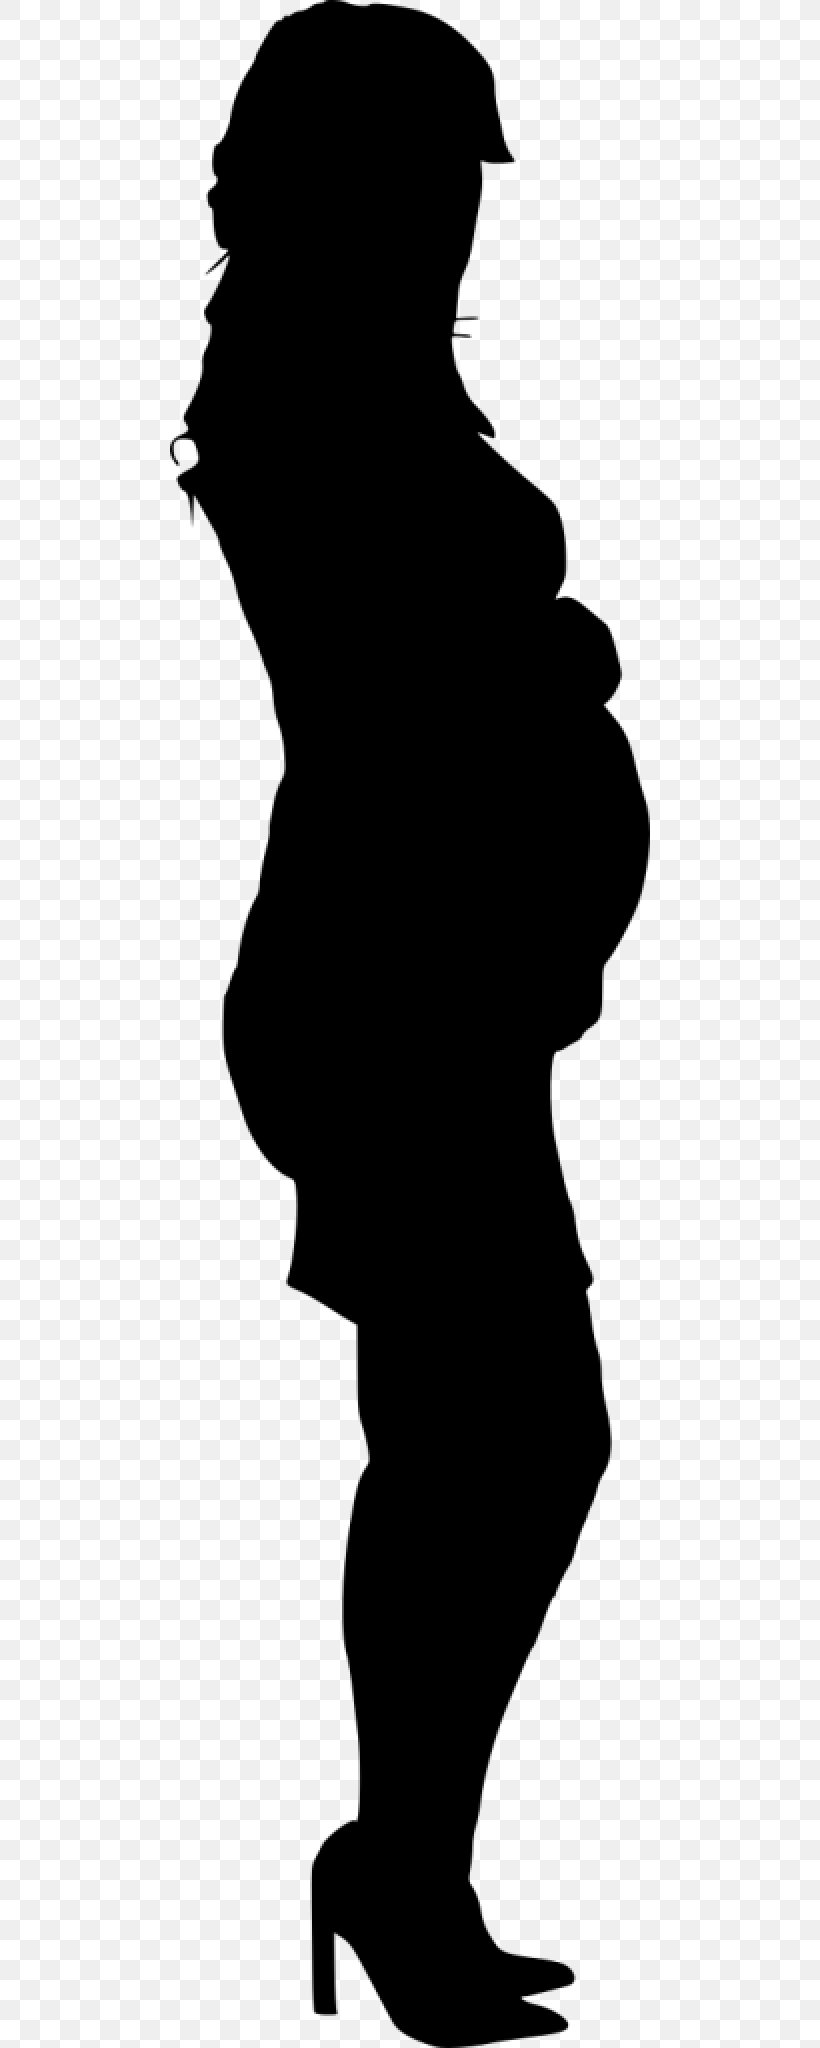 Silhouette Pregnancy Clip Art, PNG, 480x2048px, Silhouette, Black, Black And White, Childbirth, Drawing Download Free